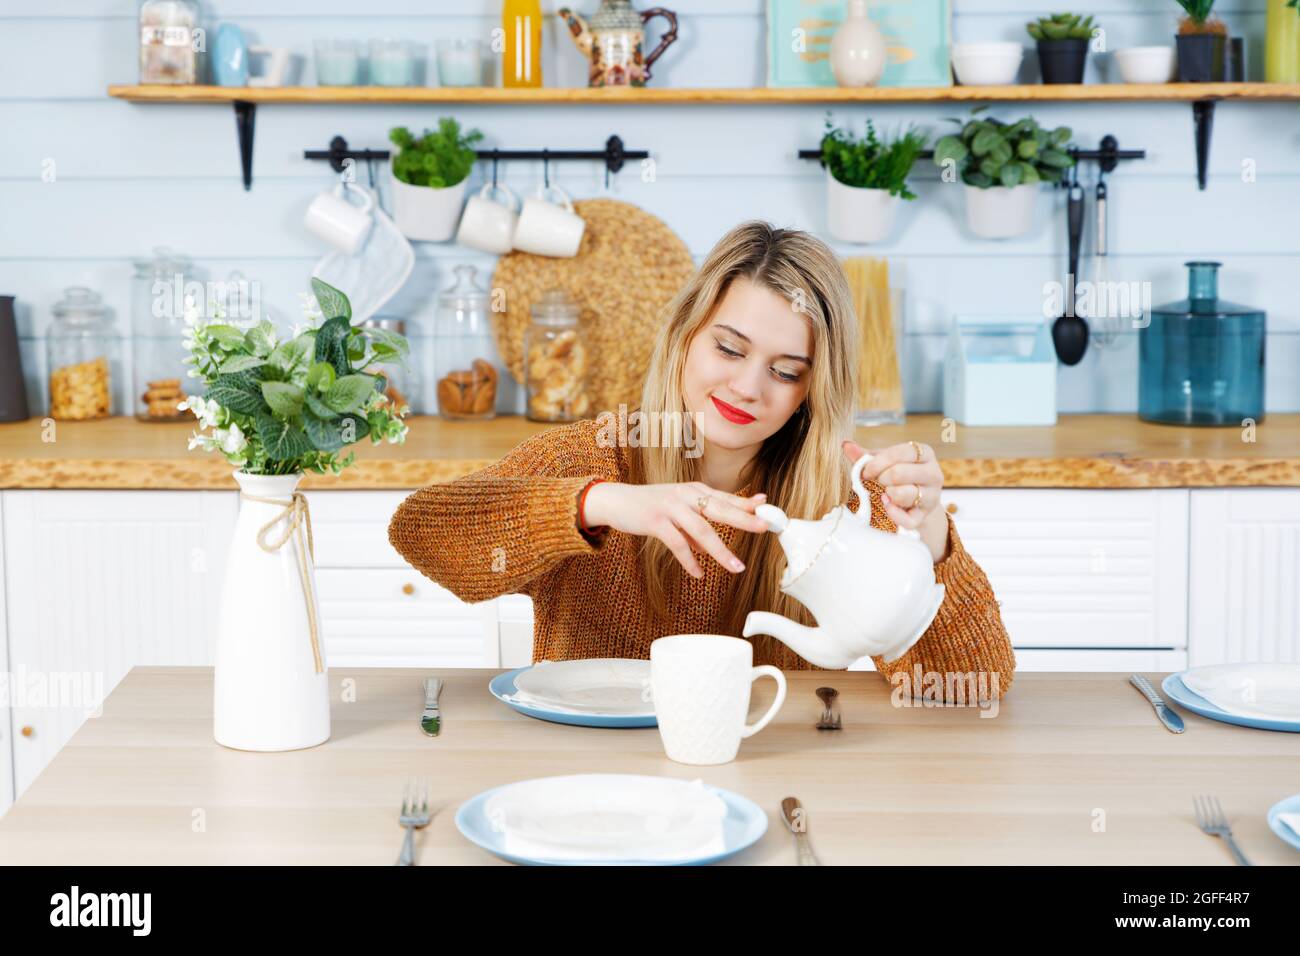 Attractive girl pours tea from a white teapot into a cup while sitting at the table in the domestic kitchen Stock Photo